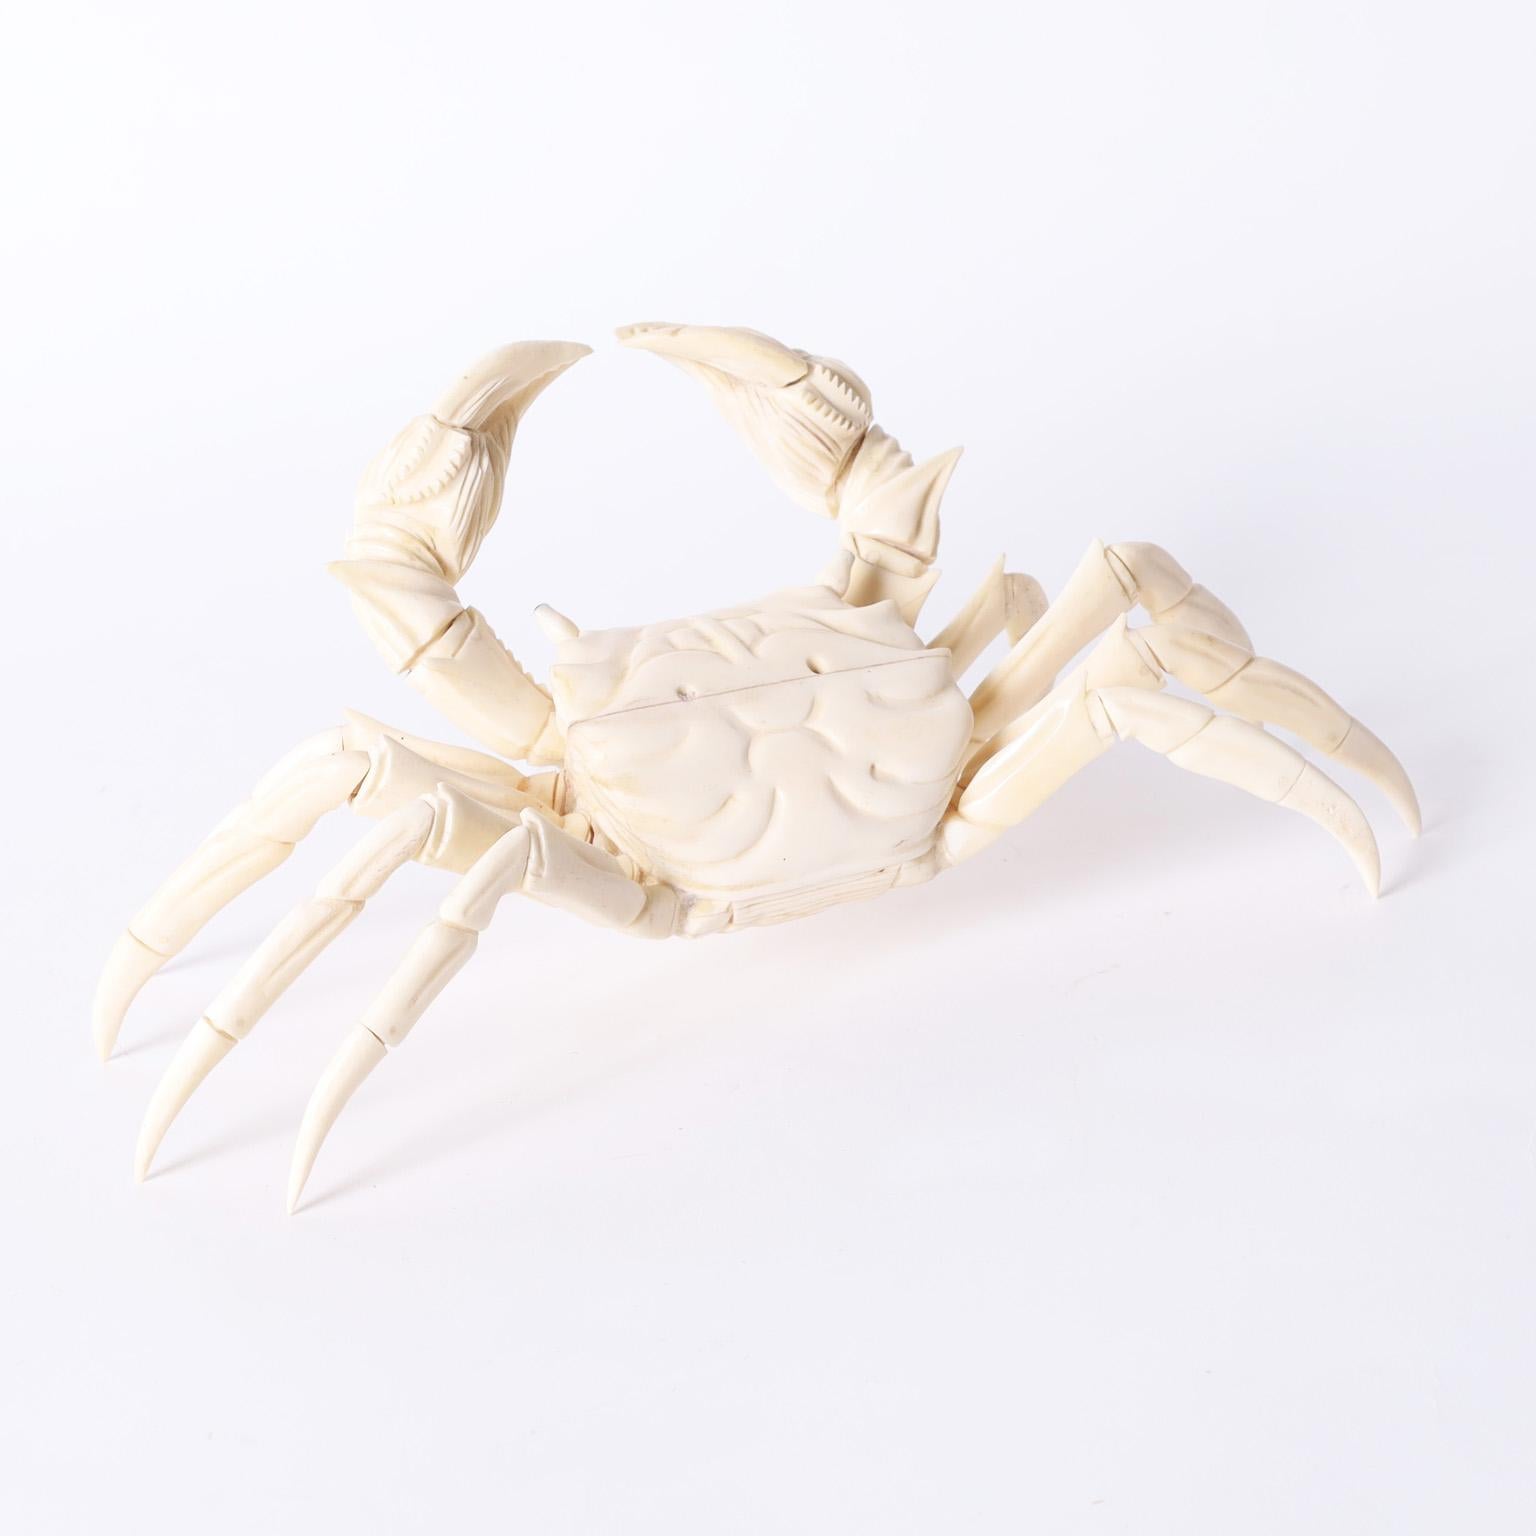 Chinese Carved Bone Crab For Sale